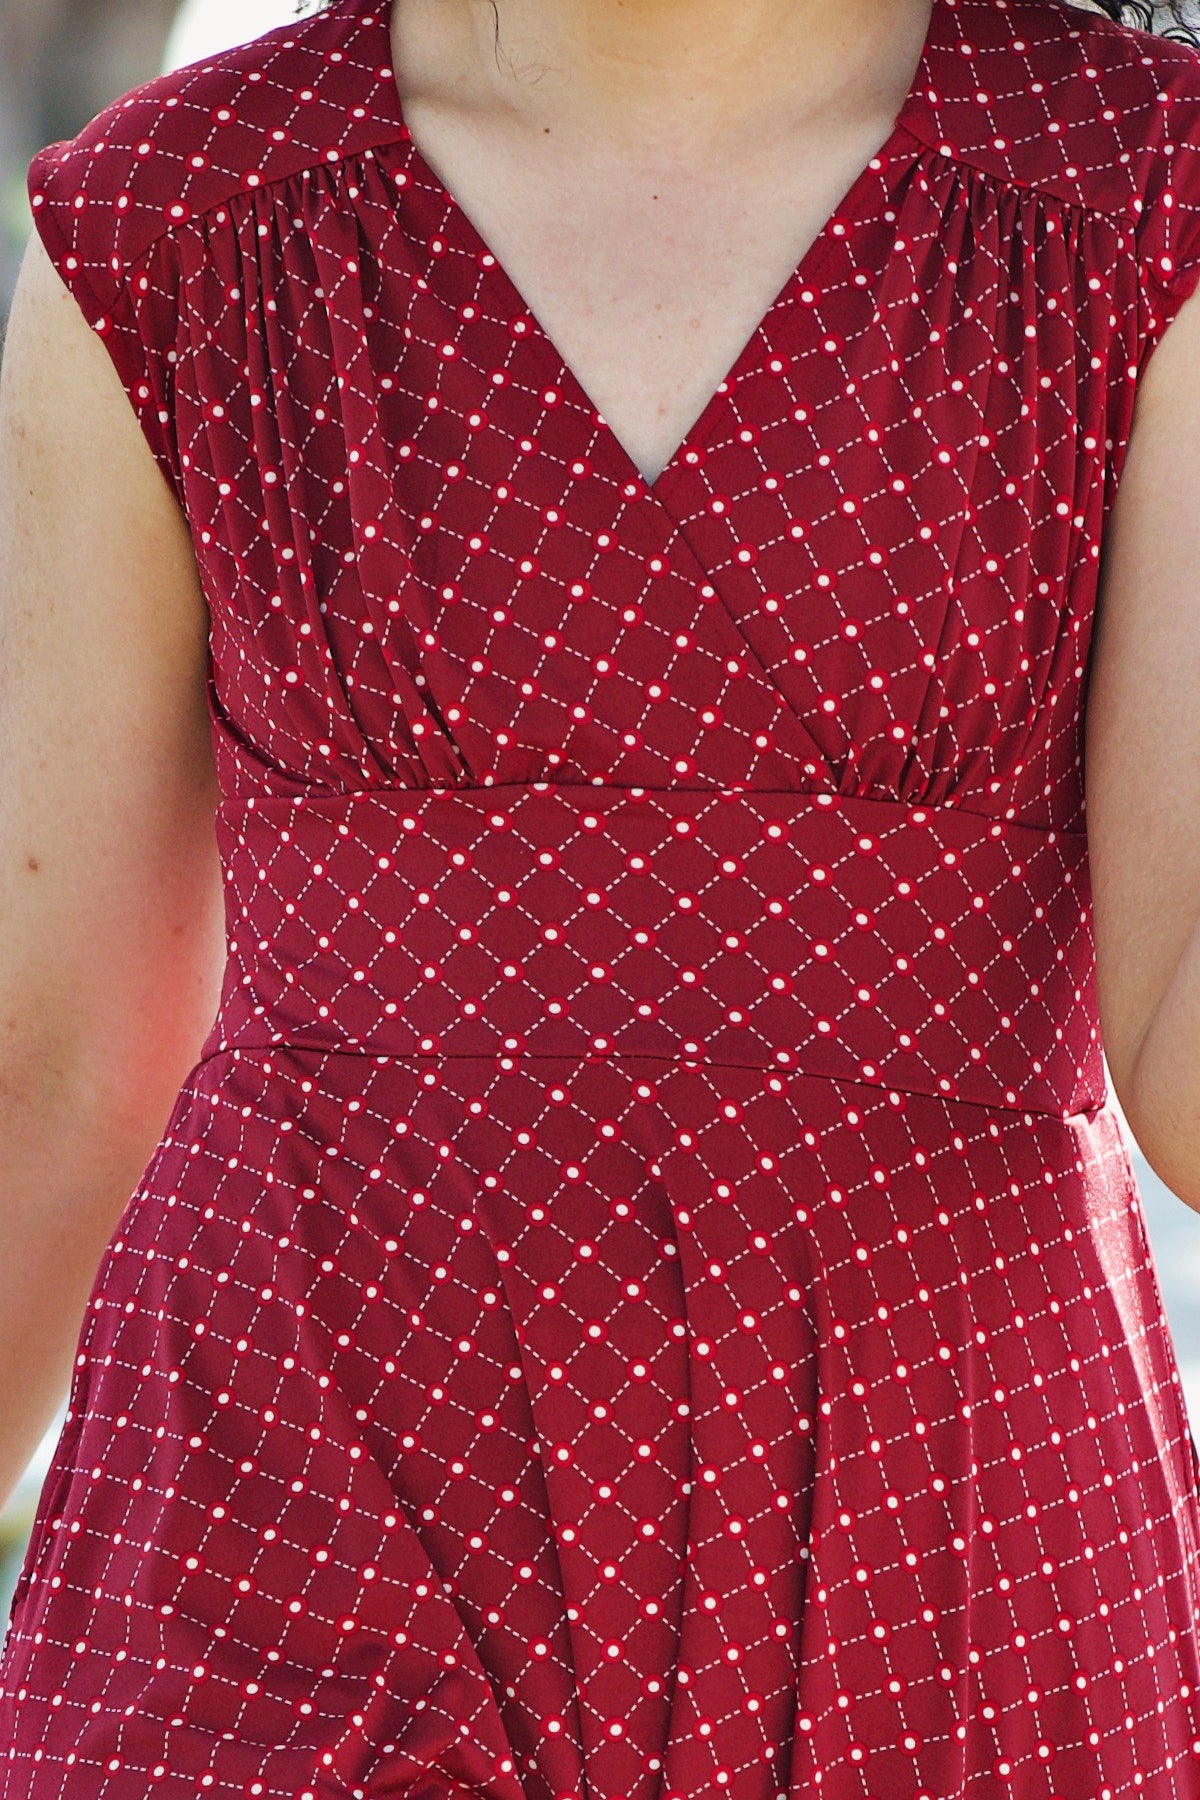 Nora Dress in Cranberry Cross Dots by Karina Dresses